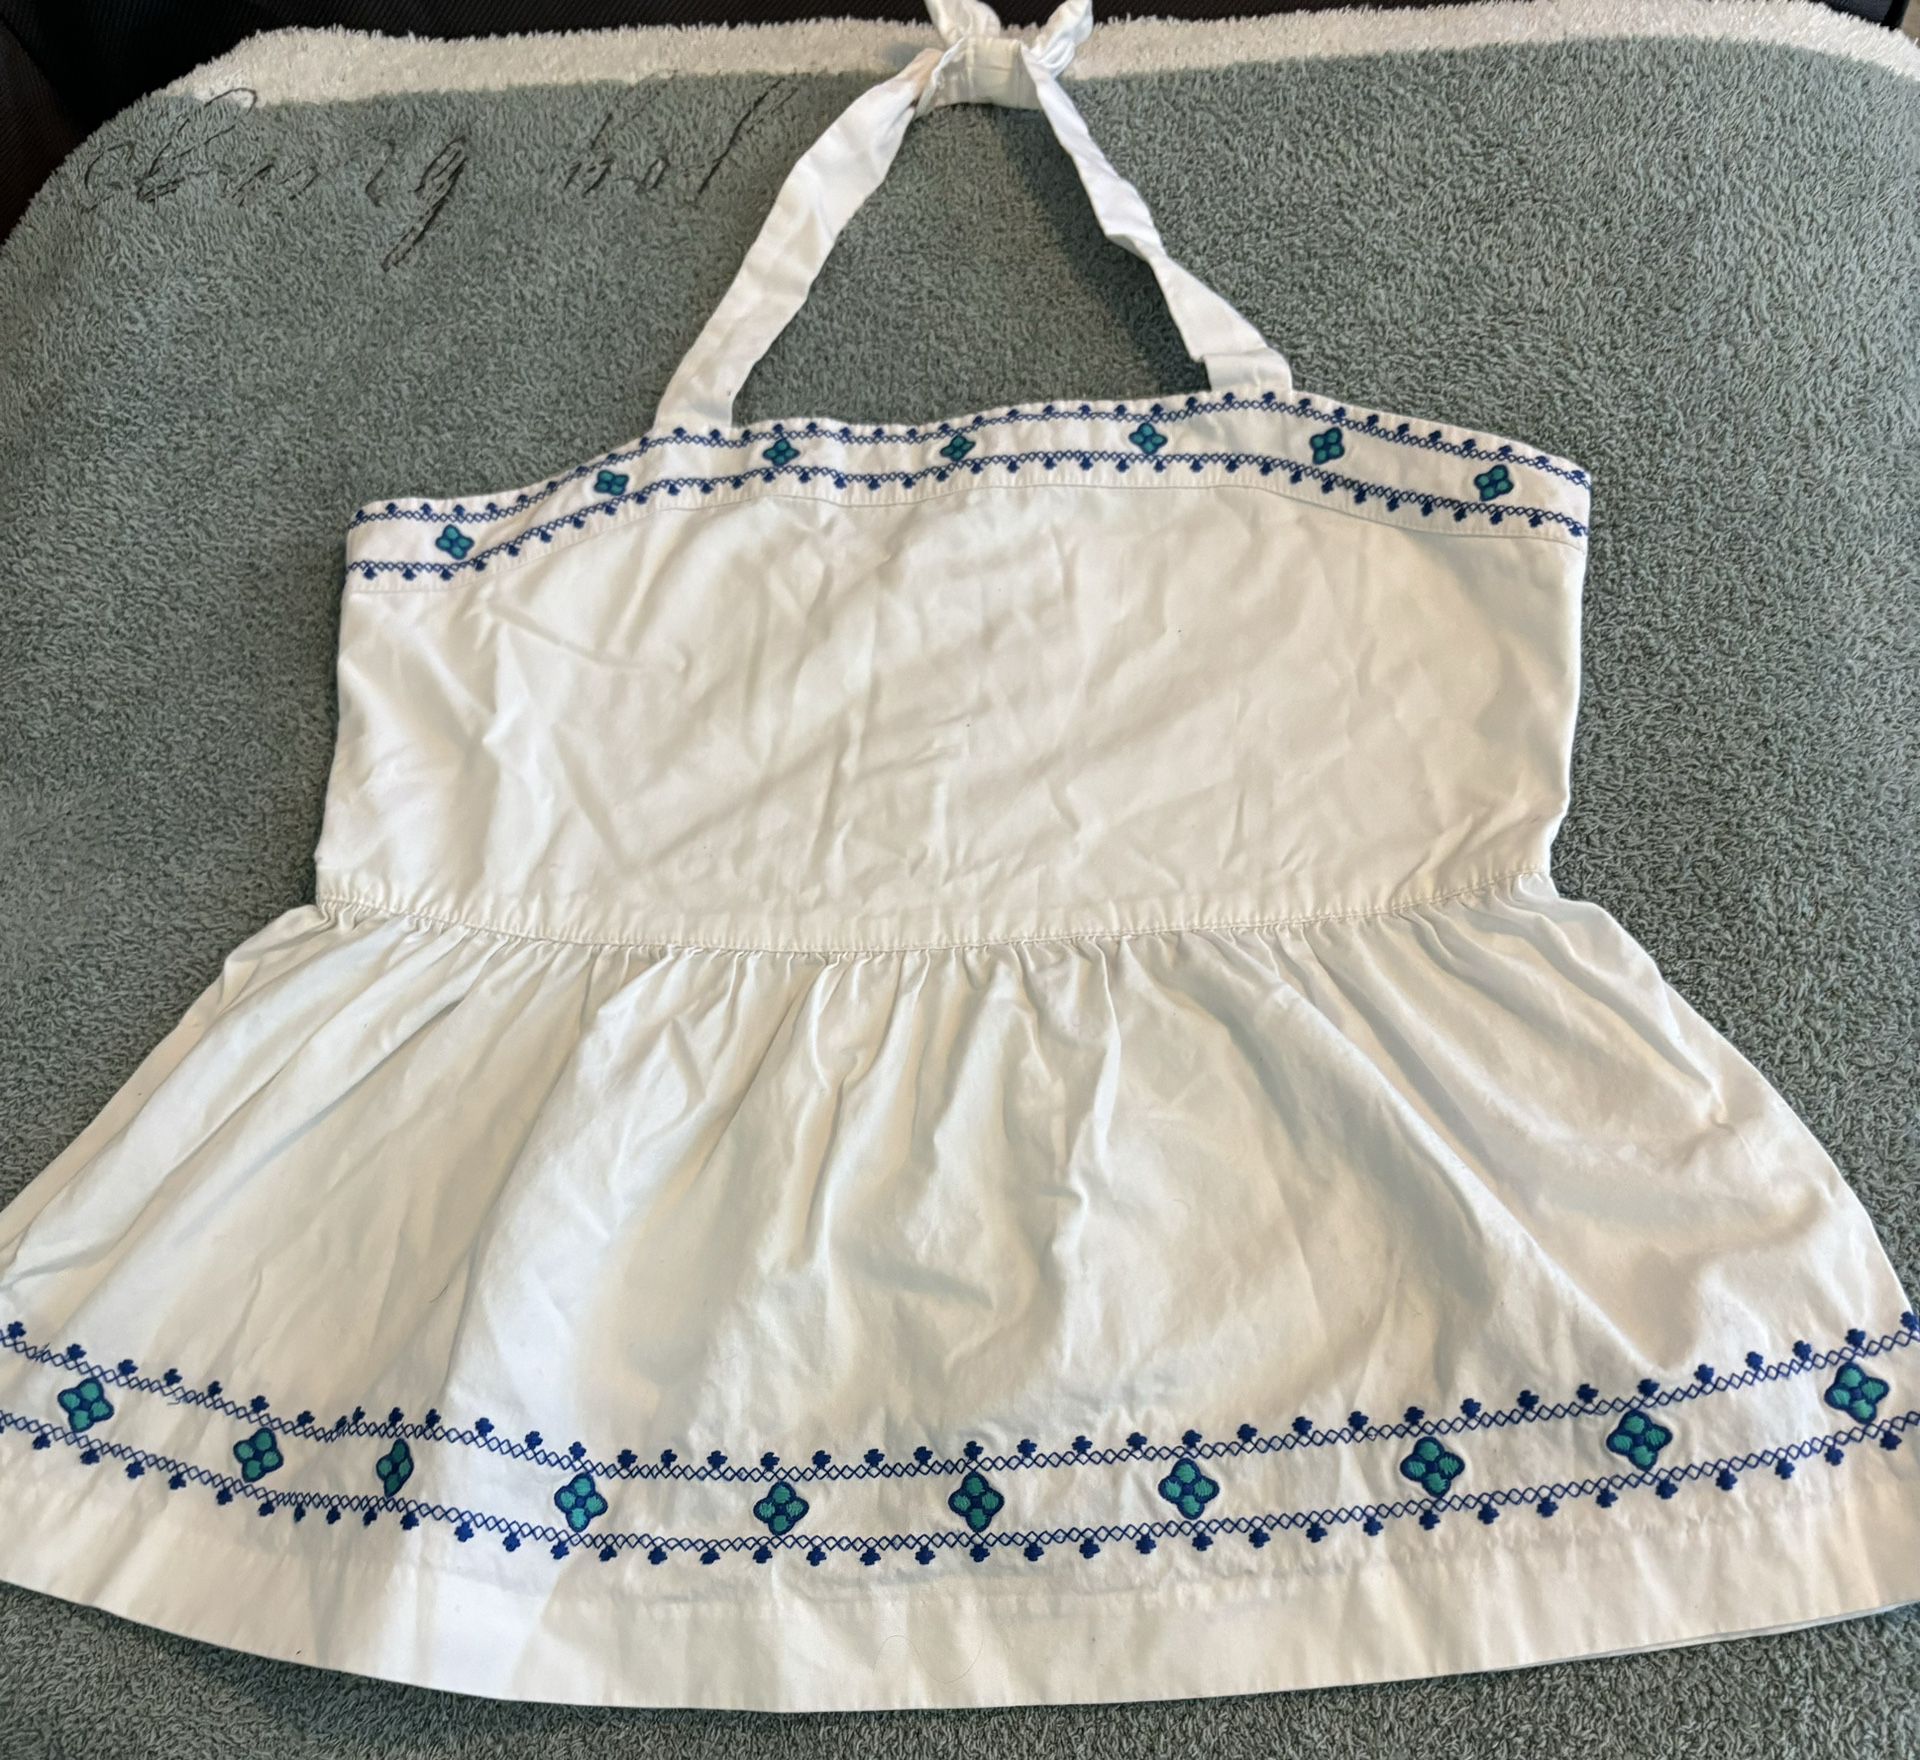 Janie and Jack Halter Floral White Top. Size 12